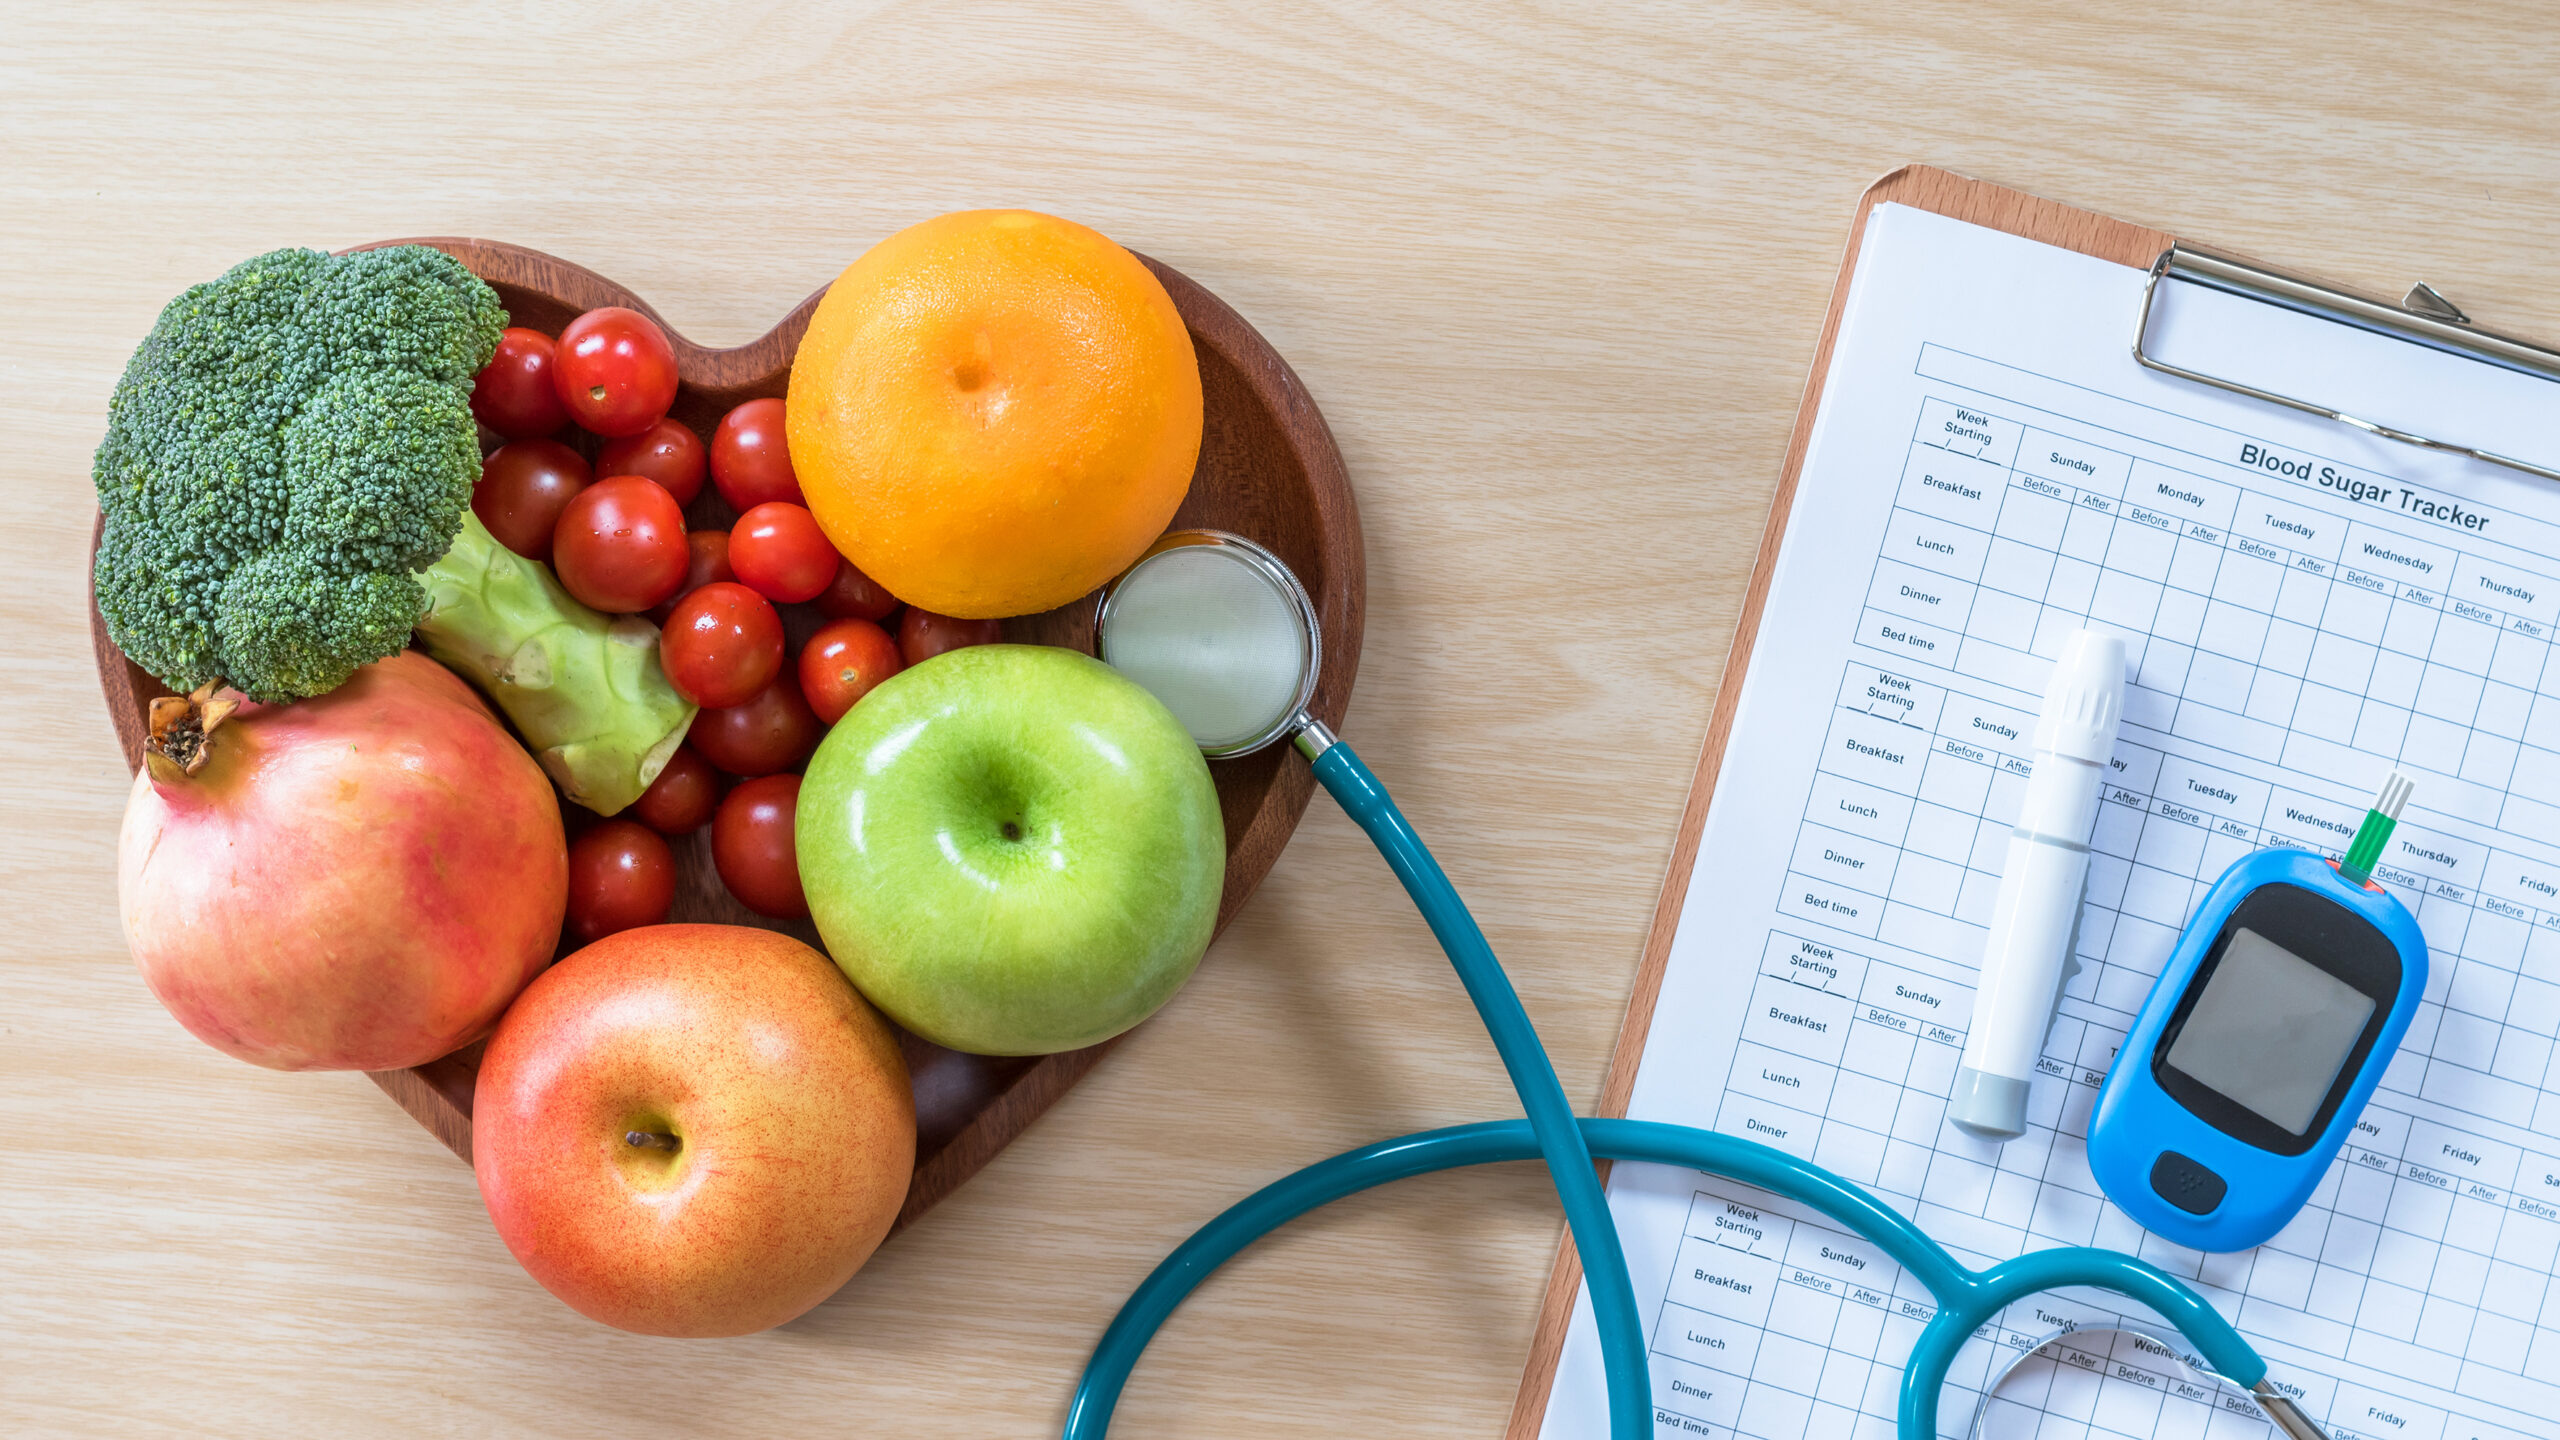 A photo with fruit in a heart-shaped bowl next to a stethoscope and blood sugar monitor.